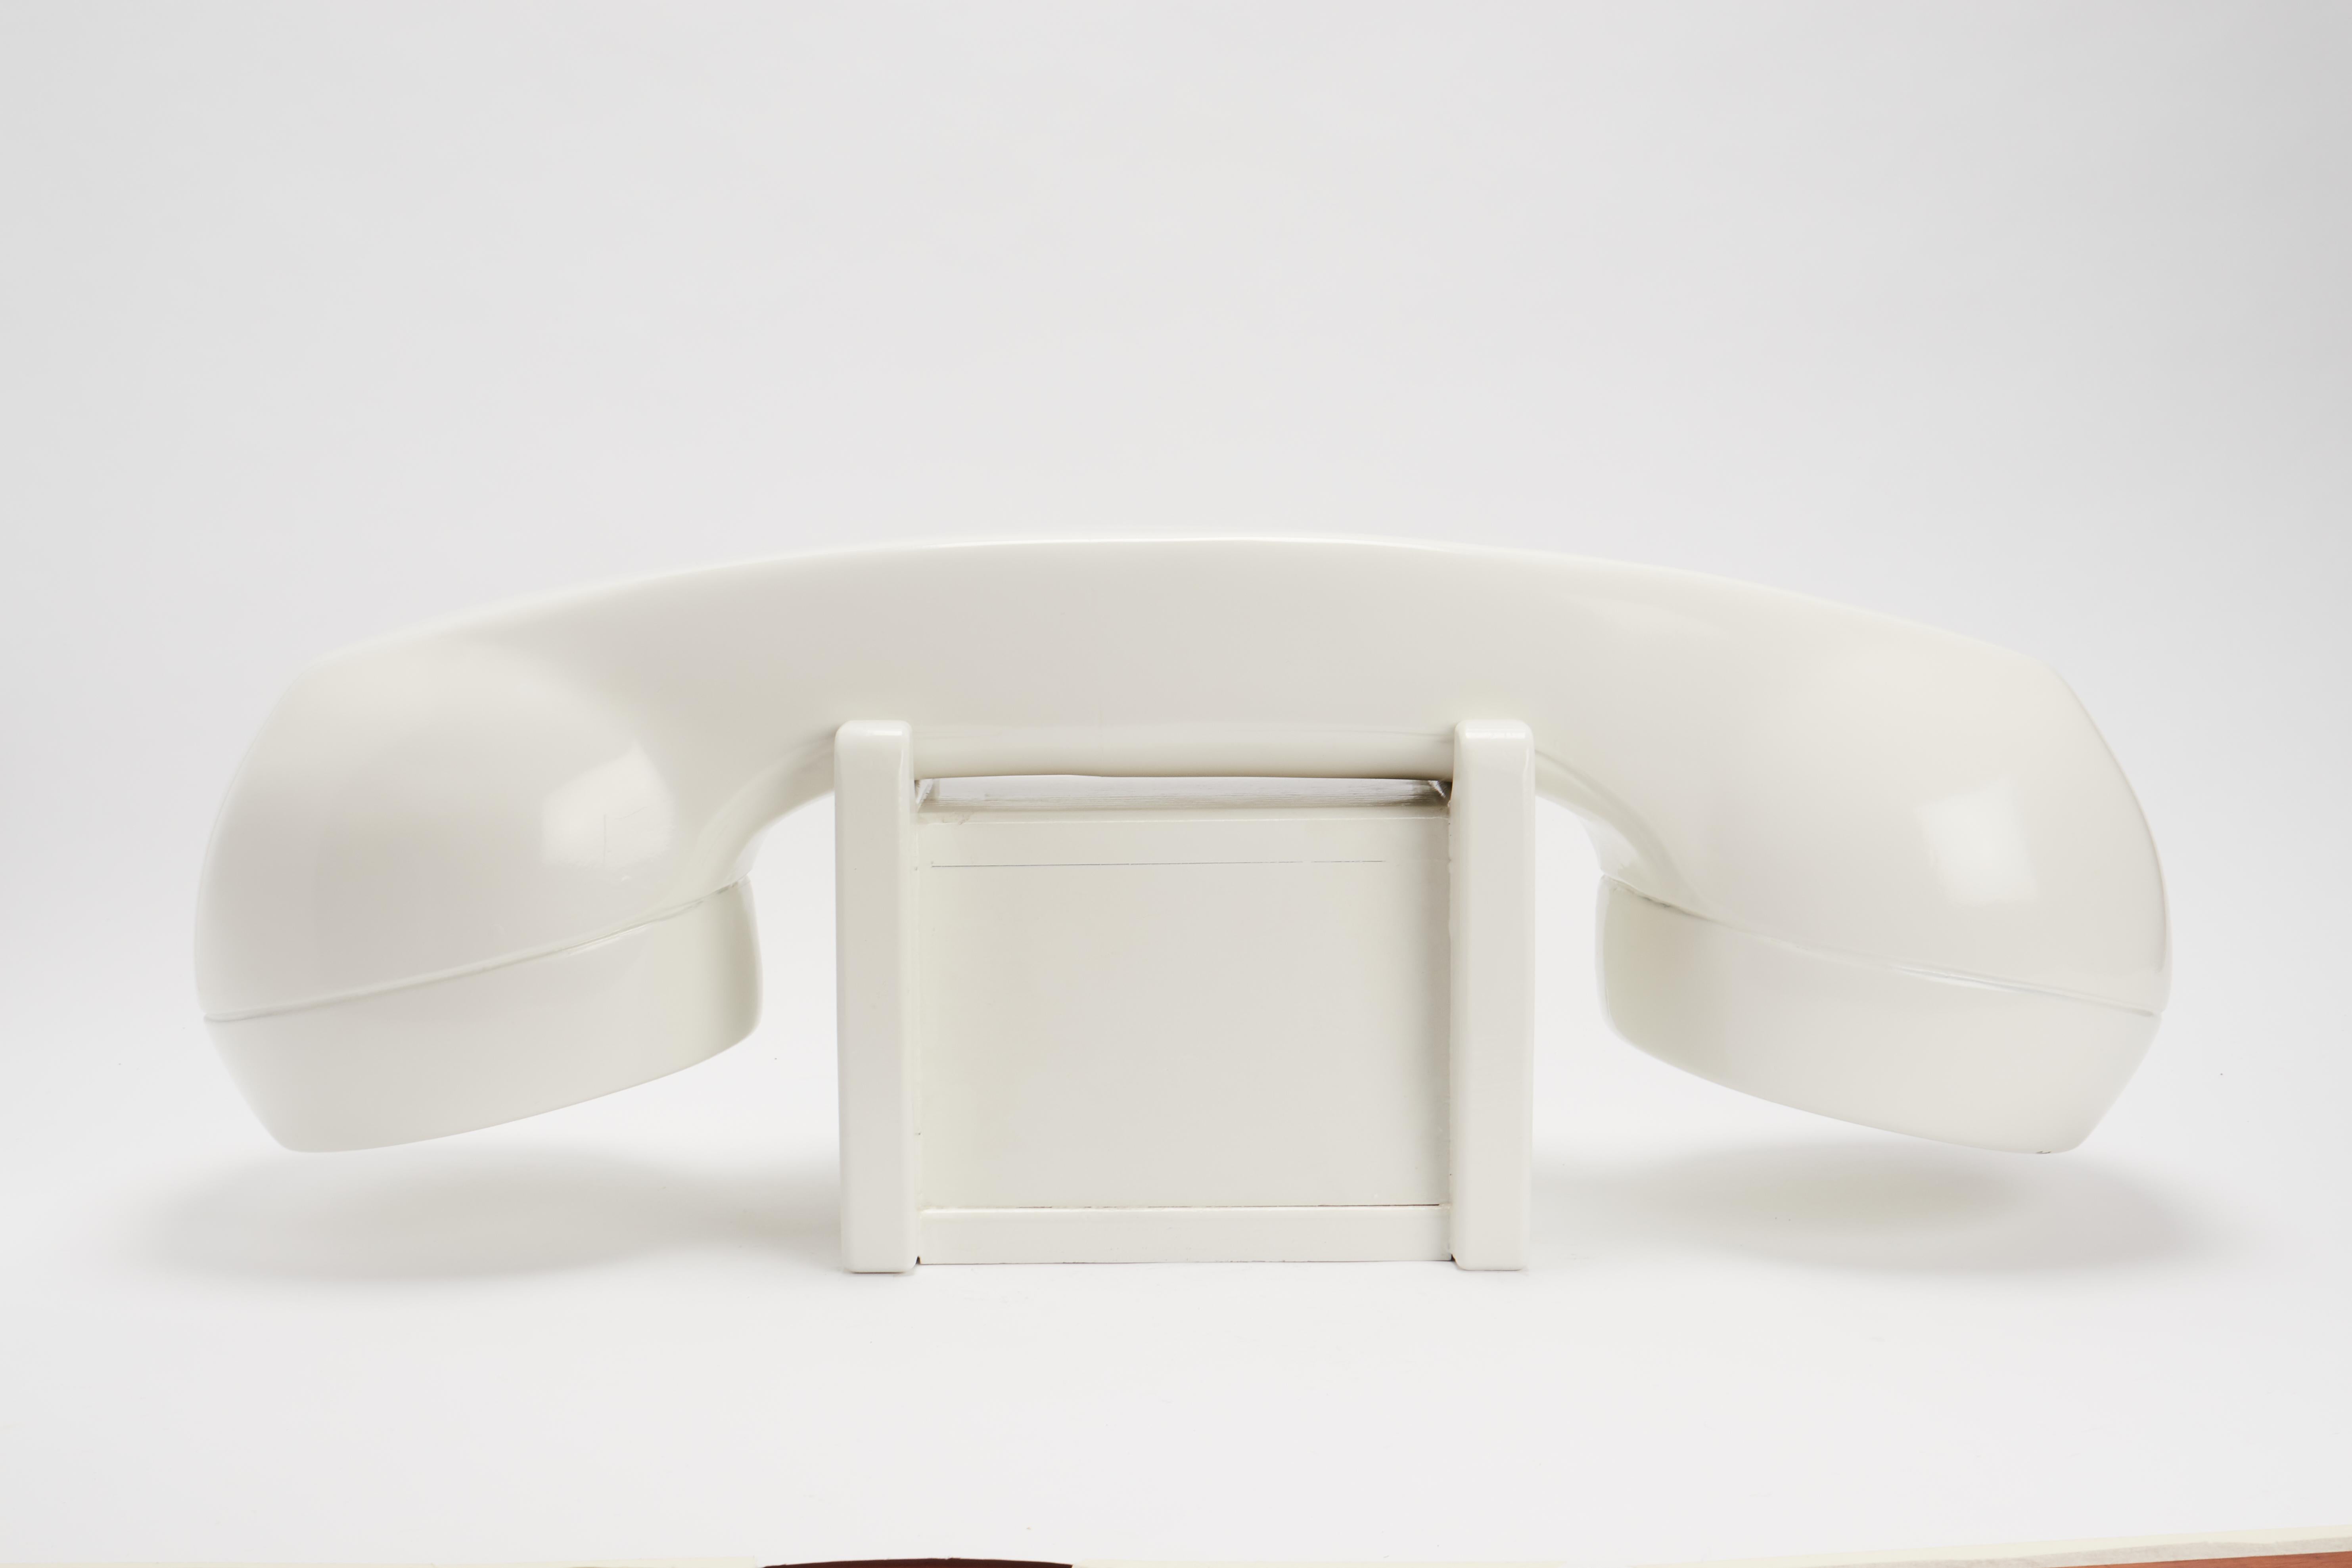 A window trade sign of an American telephone company, depicting a big phone. Carved out of fruit wood, and white enamel painted. USA 1950 ca.